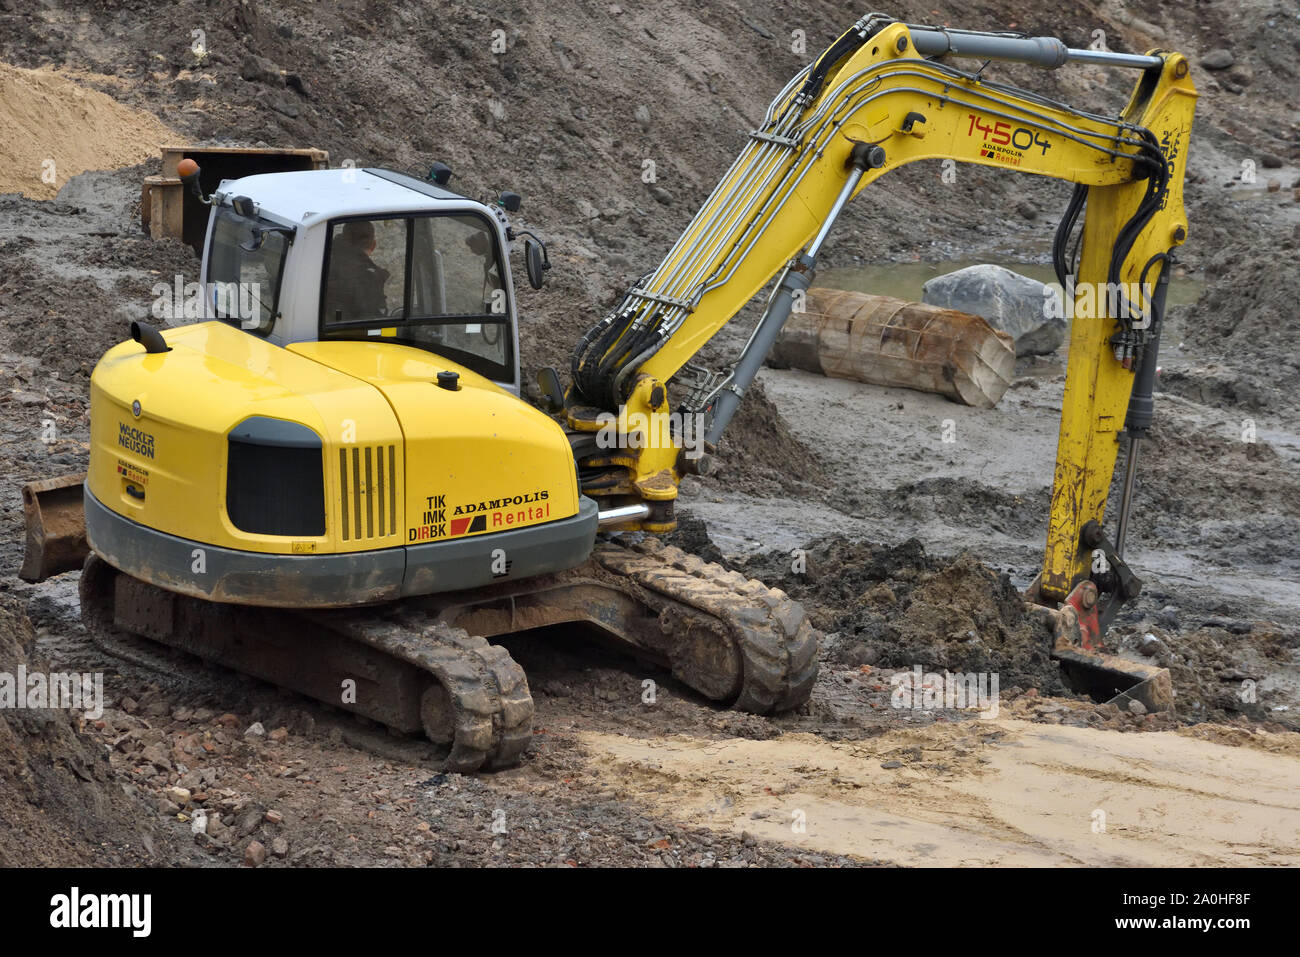 Vilnius, Lithuania - February 16: Excavator on construction site on February 16, 2019. Vilnius is the capital of Lithuania and its largest city. Stock Photo